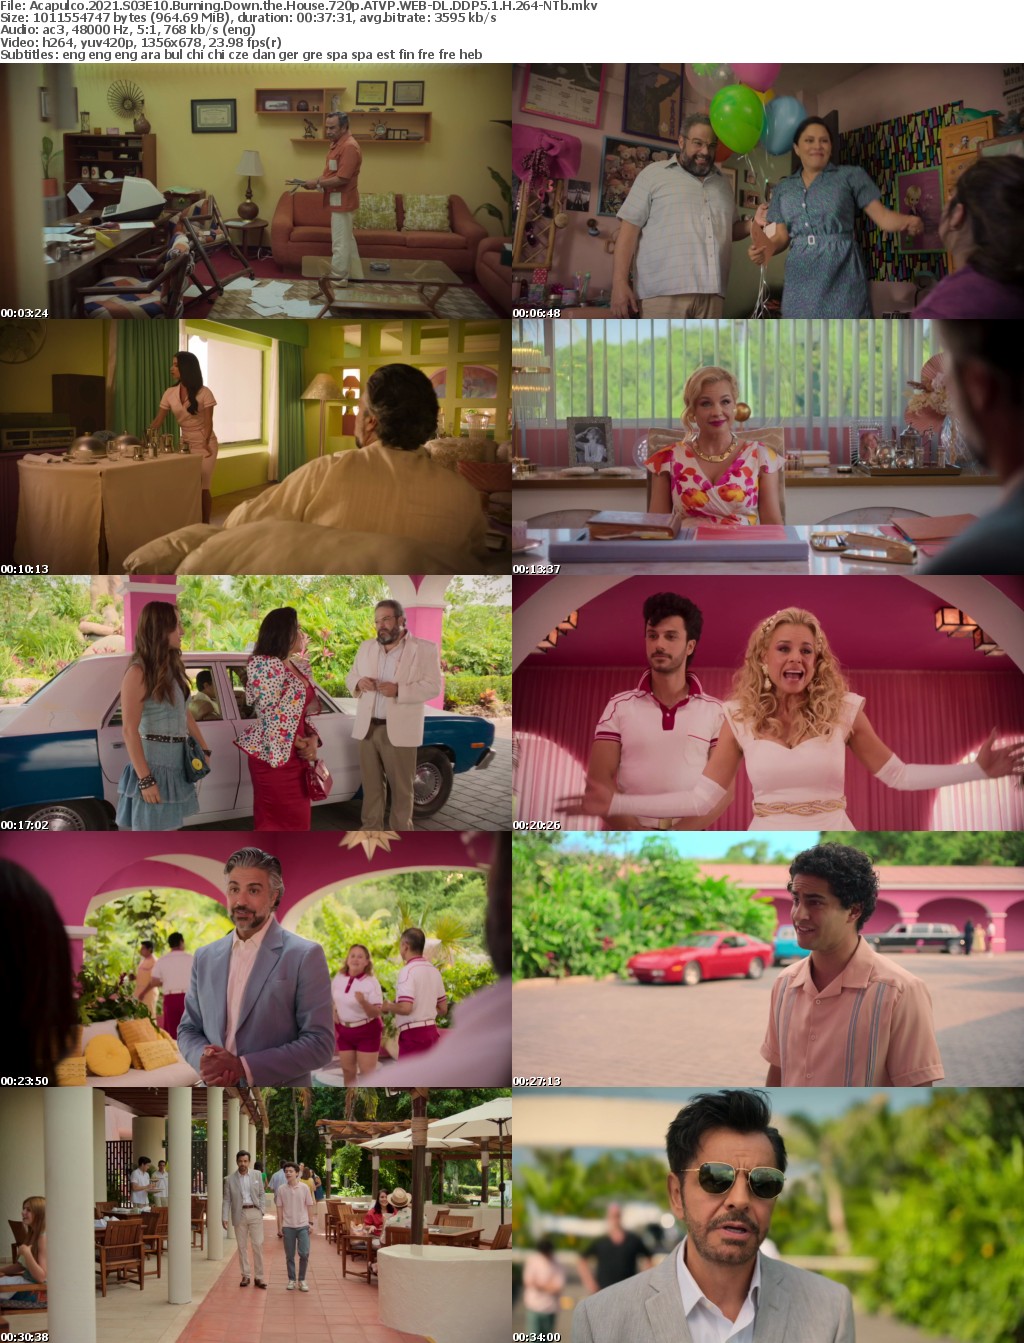 Acapulco 2021 S03E10 Burning Down the House 720p ATVP WEB-DL DDP5 1 H 264-NTb